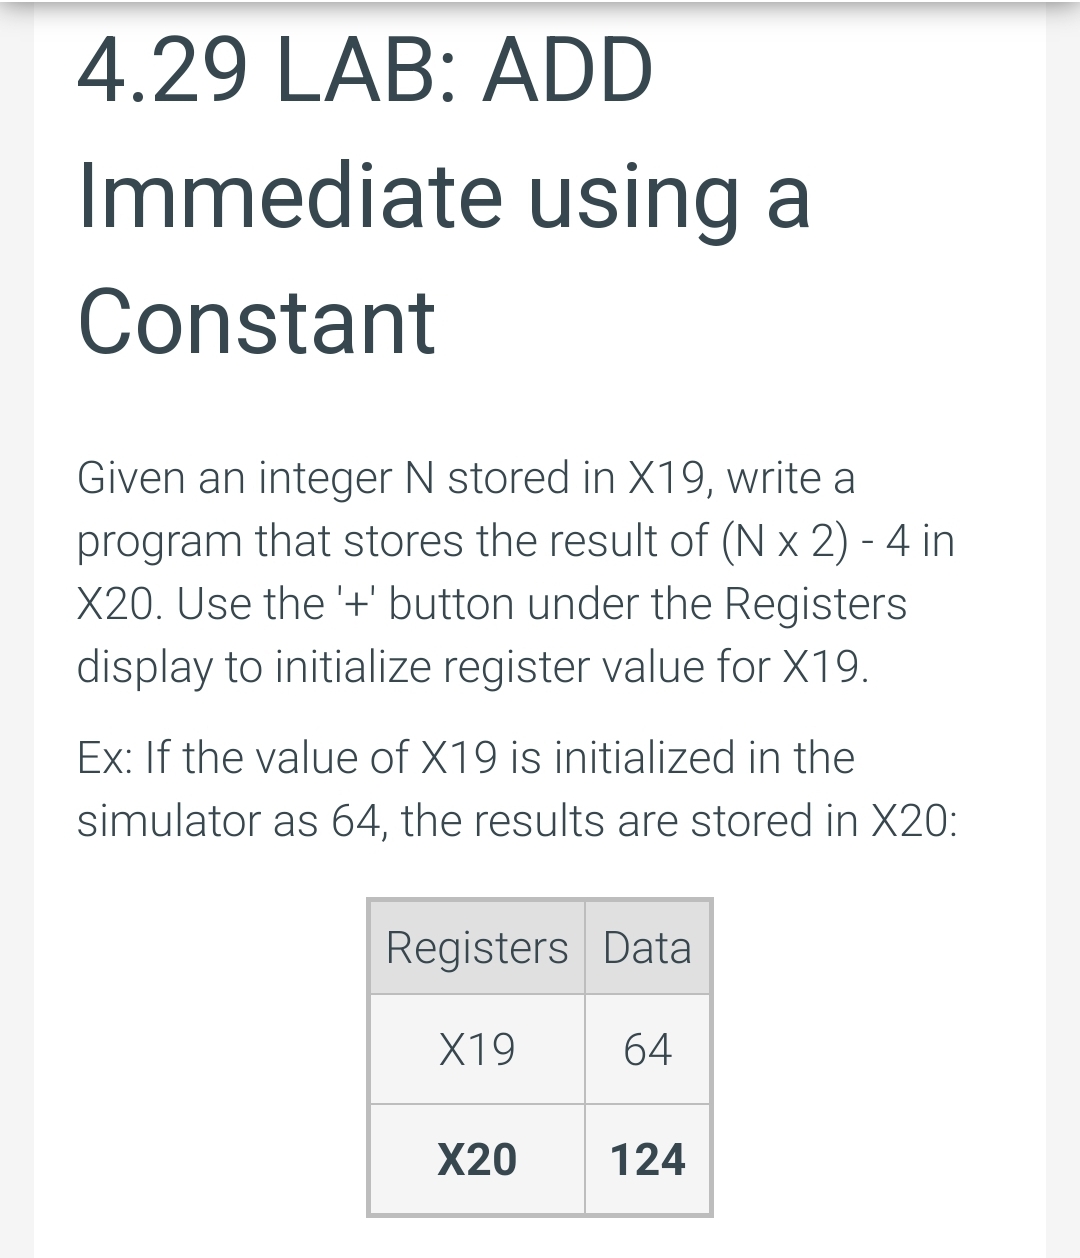 4.29 LAB: ADD
Immediate using a
Constant
Given an integer N stored in X19, write a
program that stores the result of ( x 2) - 4 in
X20. Use the '+' button under the Registers
display to initialize register value for X19.
Ex: If the value of X19 is initialized in the
simulator as 64, the results are stored in X20:
Registers Data
X19
64
X20
124